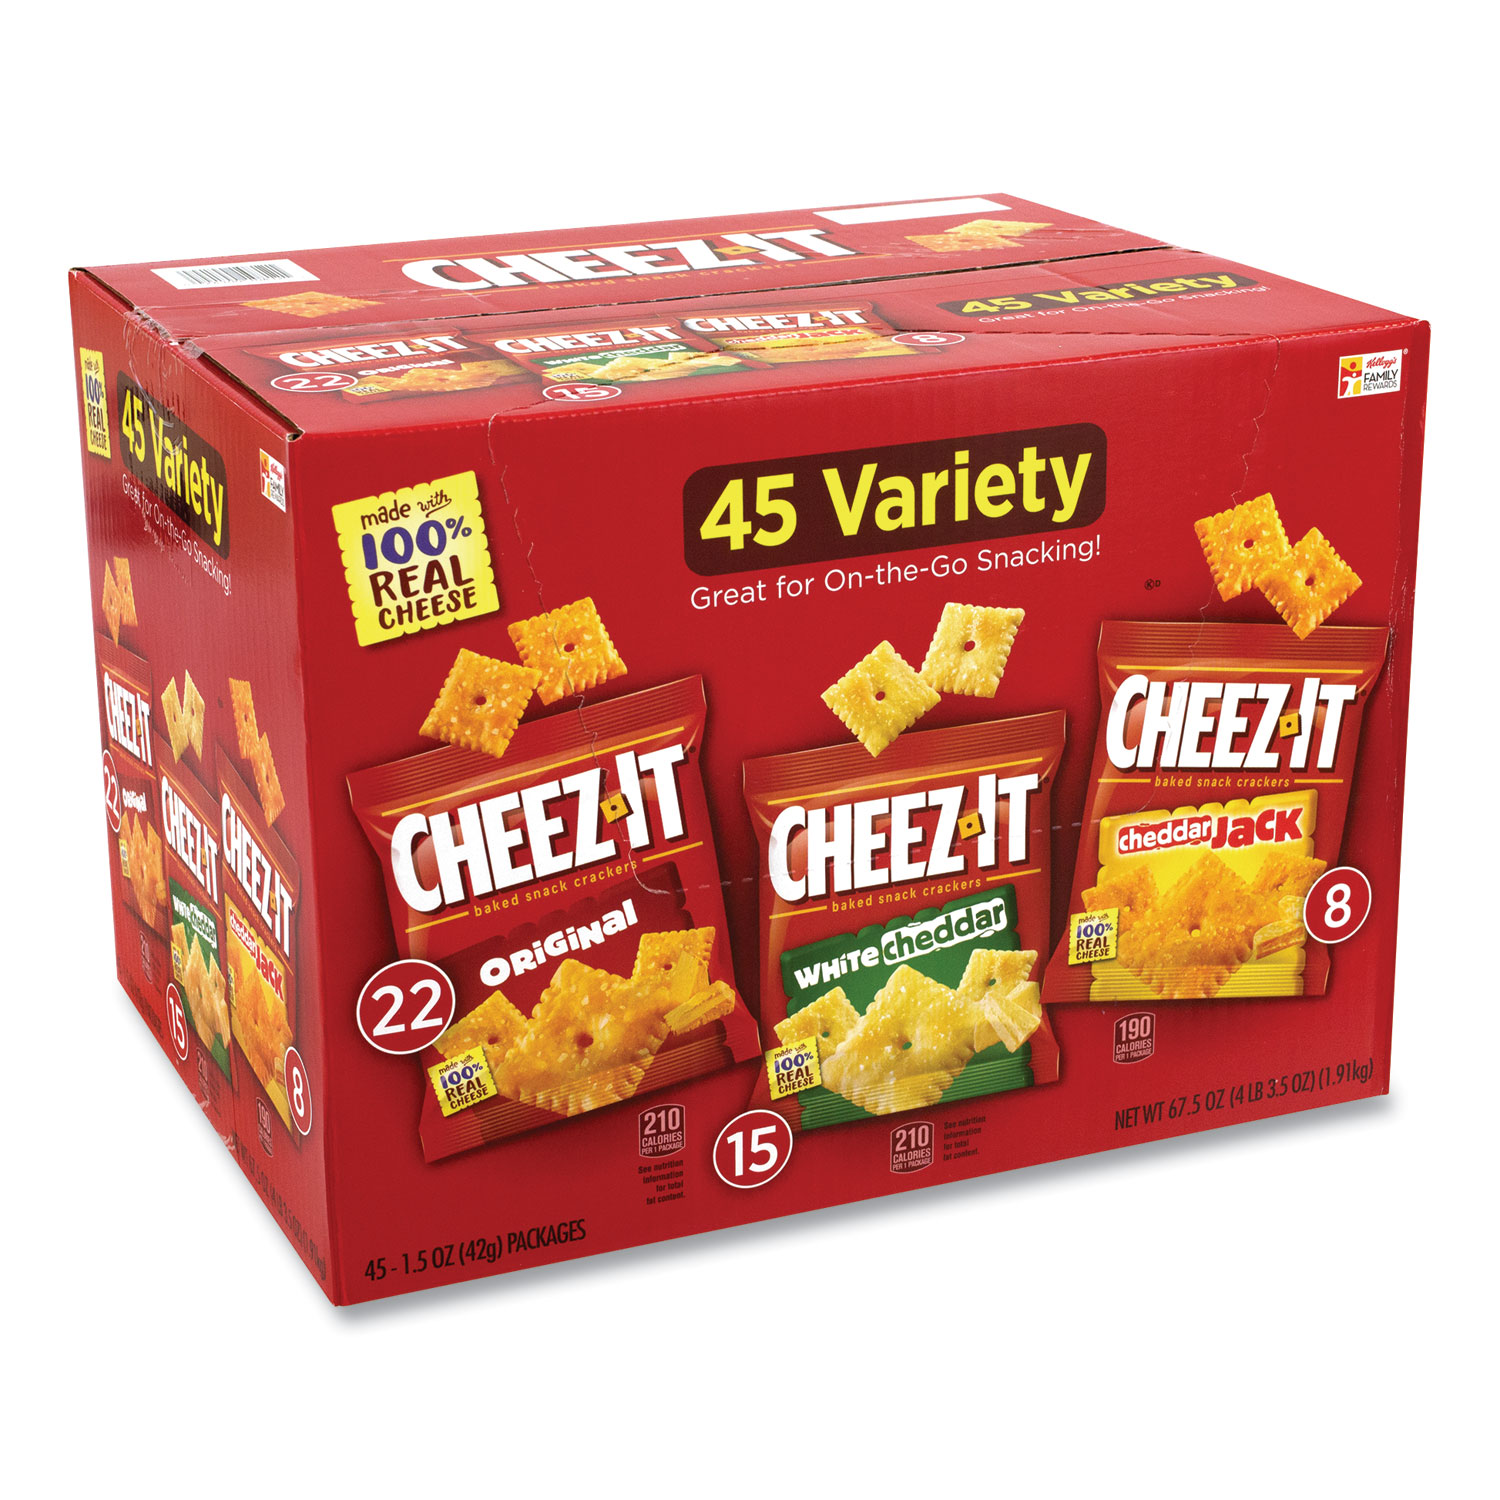  Sunshine 2410010811 Cheez-It Crackers, Cheddar Jack/Original/White Cheddar, 1.5 oz Bag, 45 Bags/Box, Free Delivery in 1-4 Business Days (GRR22000658) 